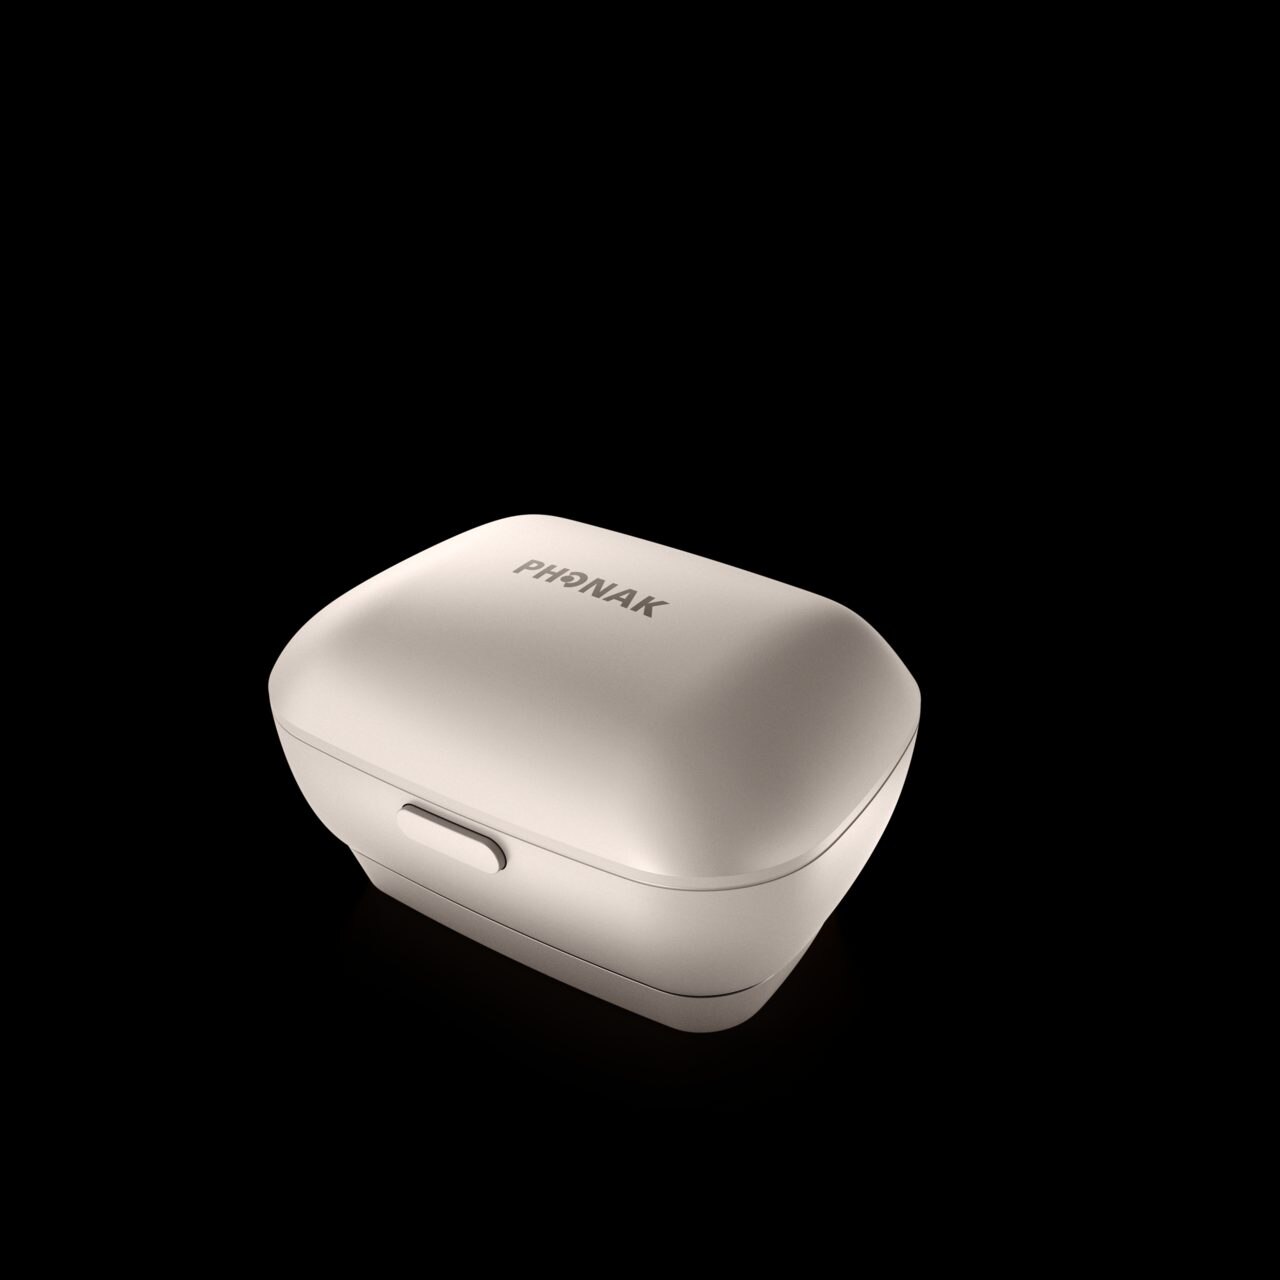 Phonak hearing aid charger case.